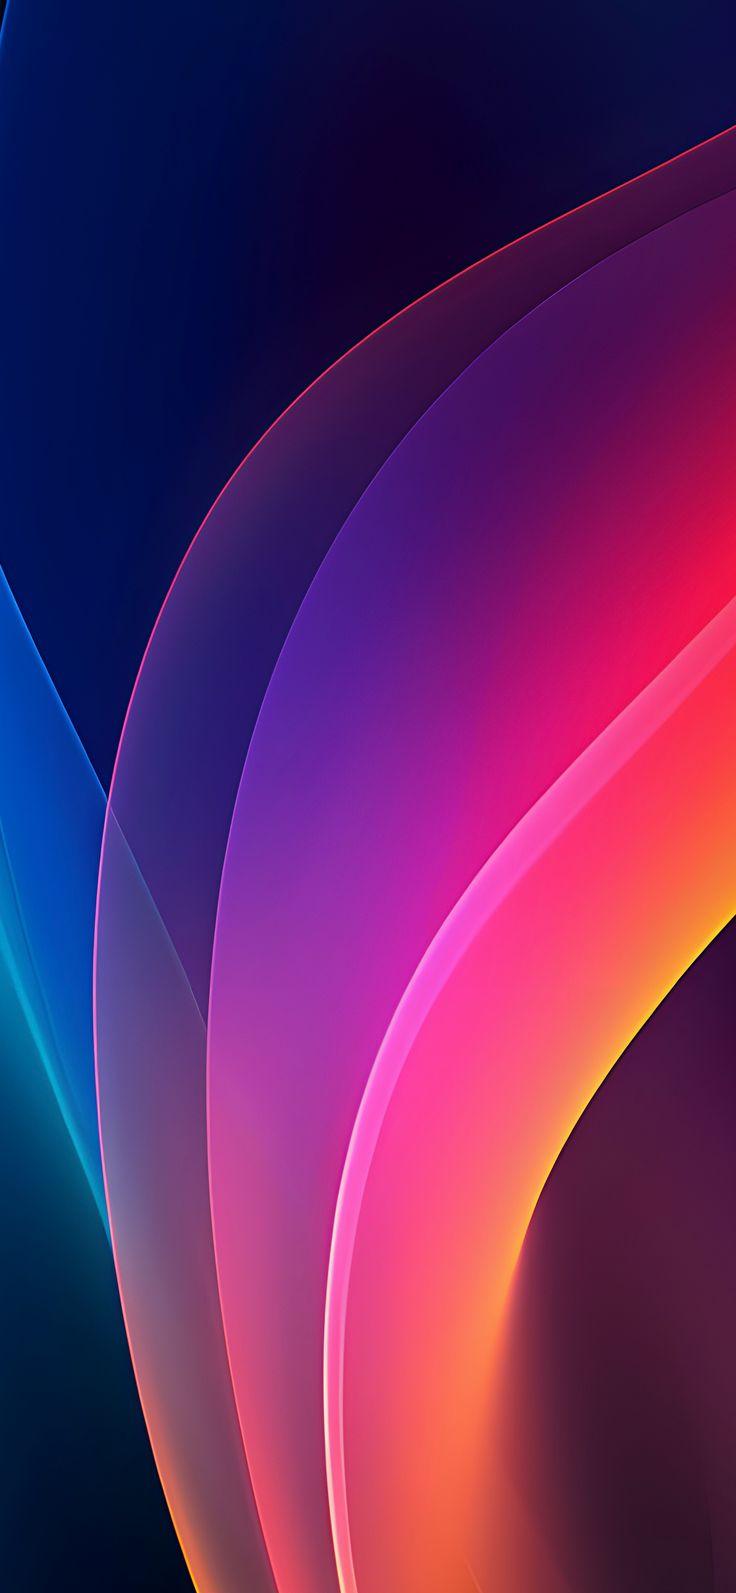 Ios17 Beta Glimpse By Fresk0 In Android Wallpaper